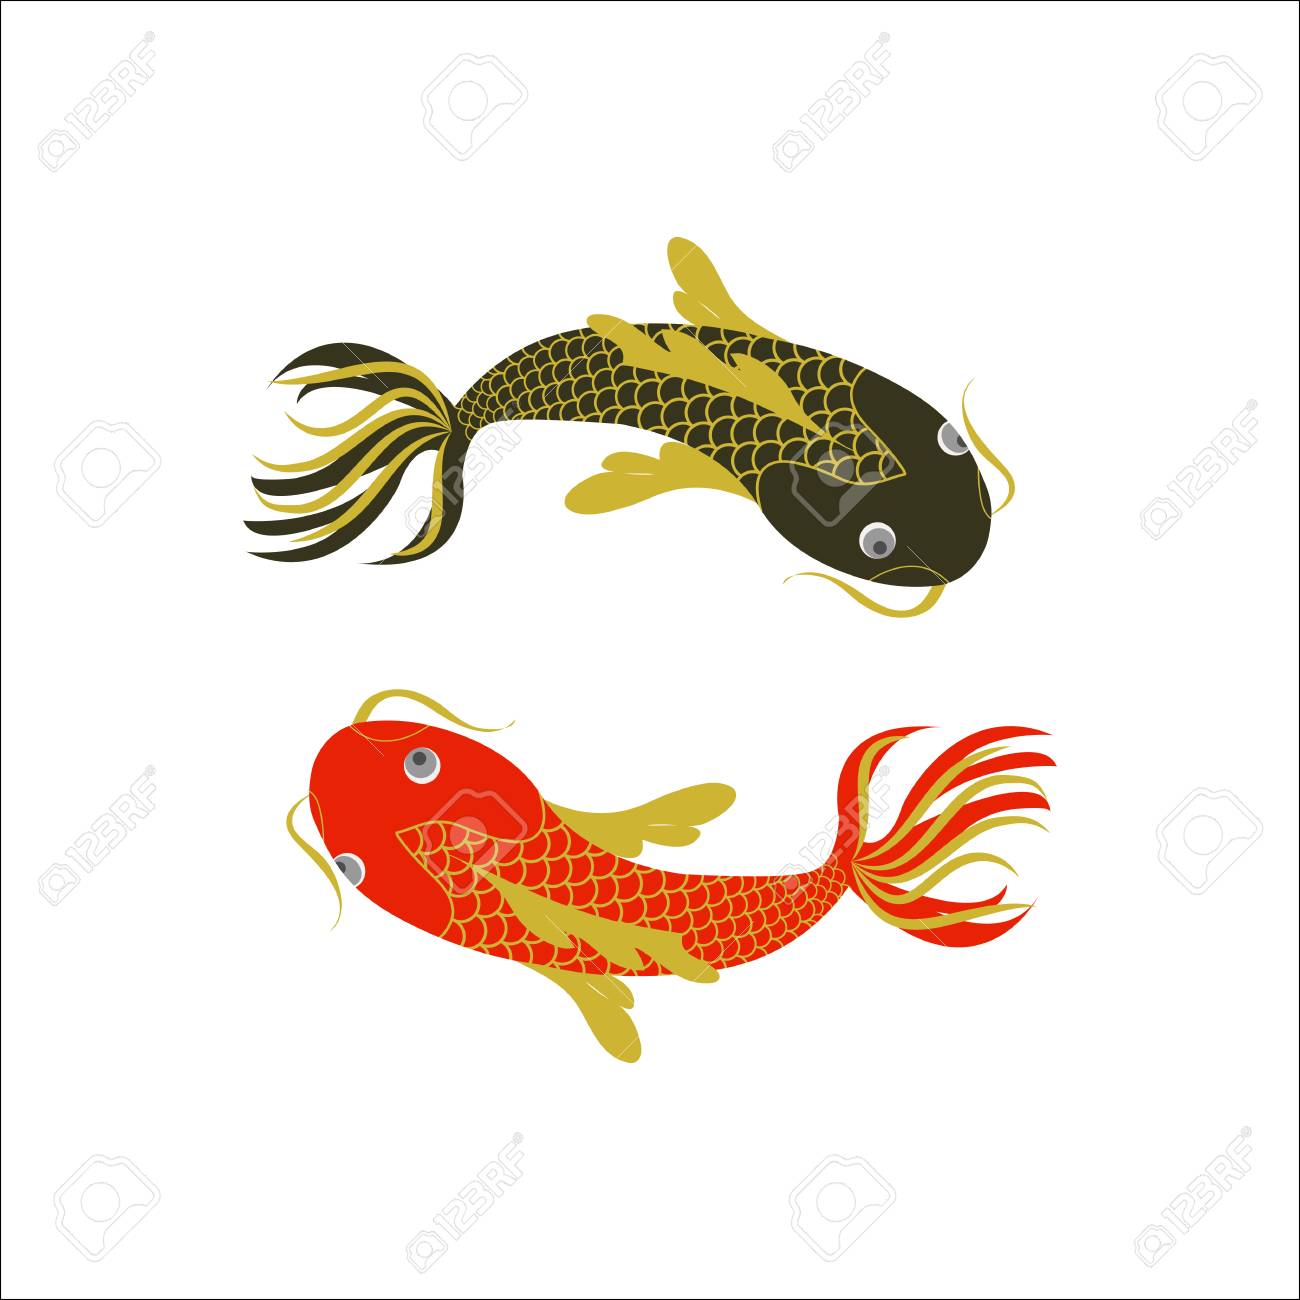 Yin Yang Koi Fish In Oriental Style Isolated On White Background